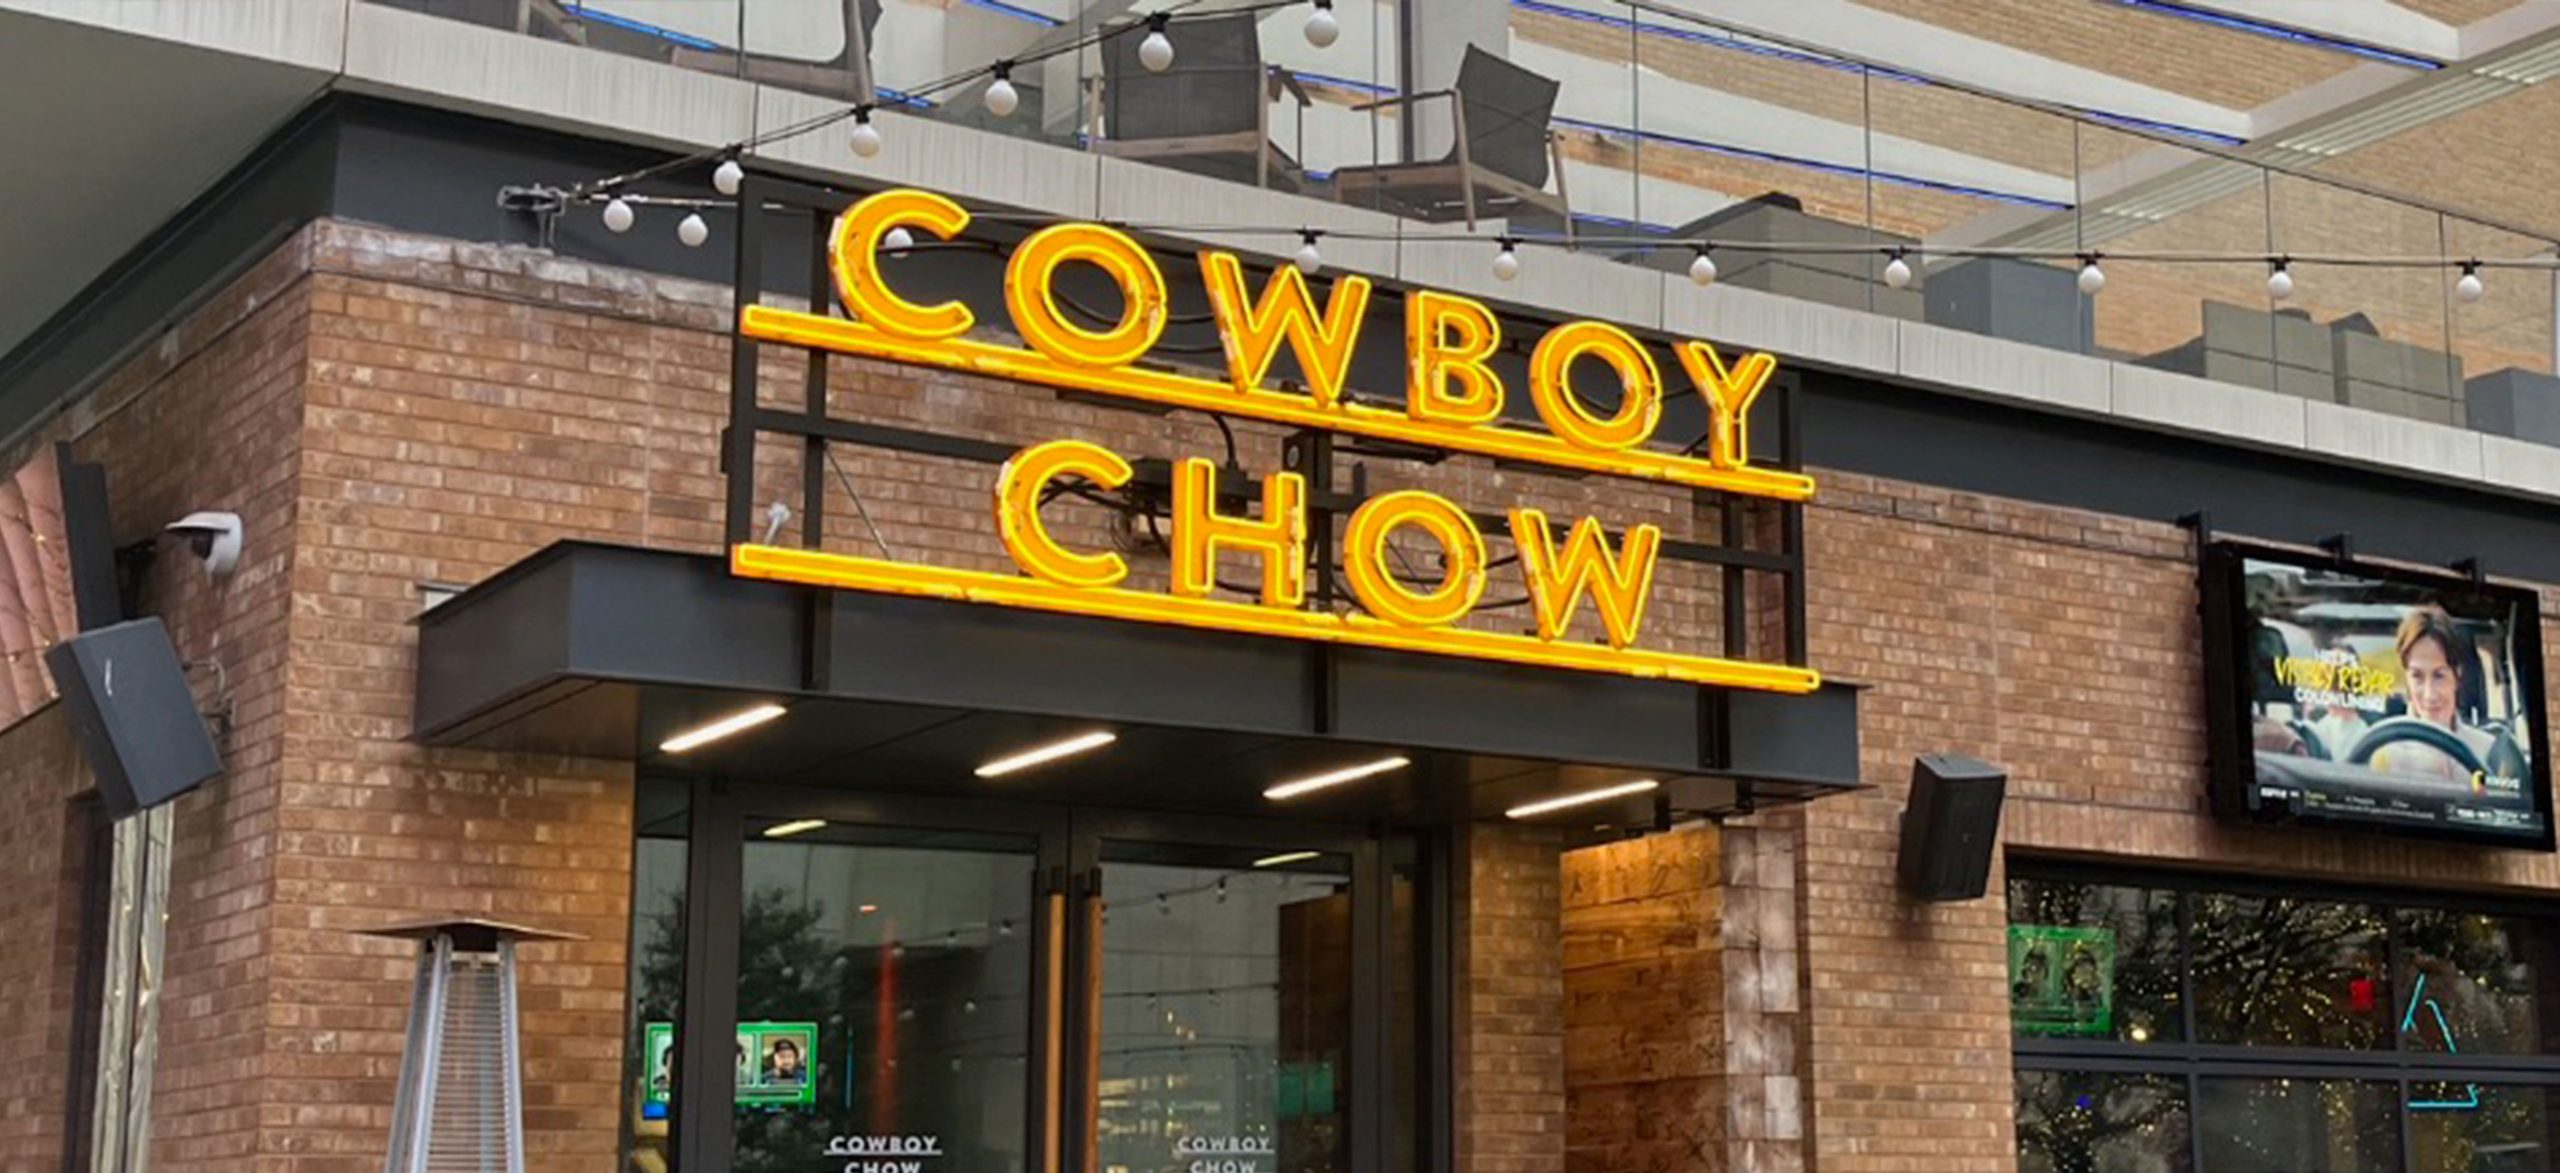 Background image for Cowboy Chow